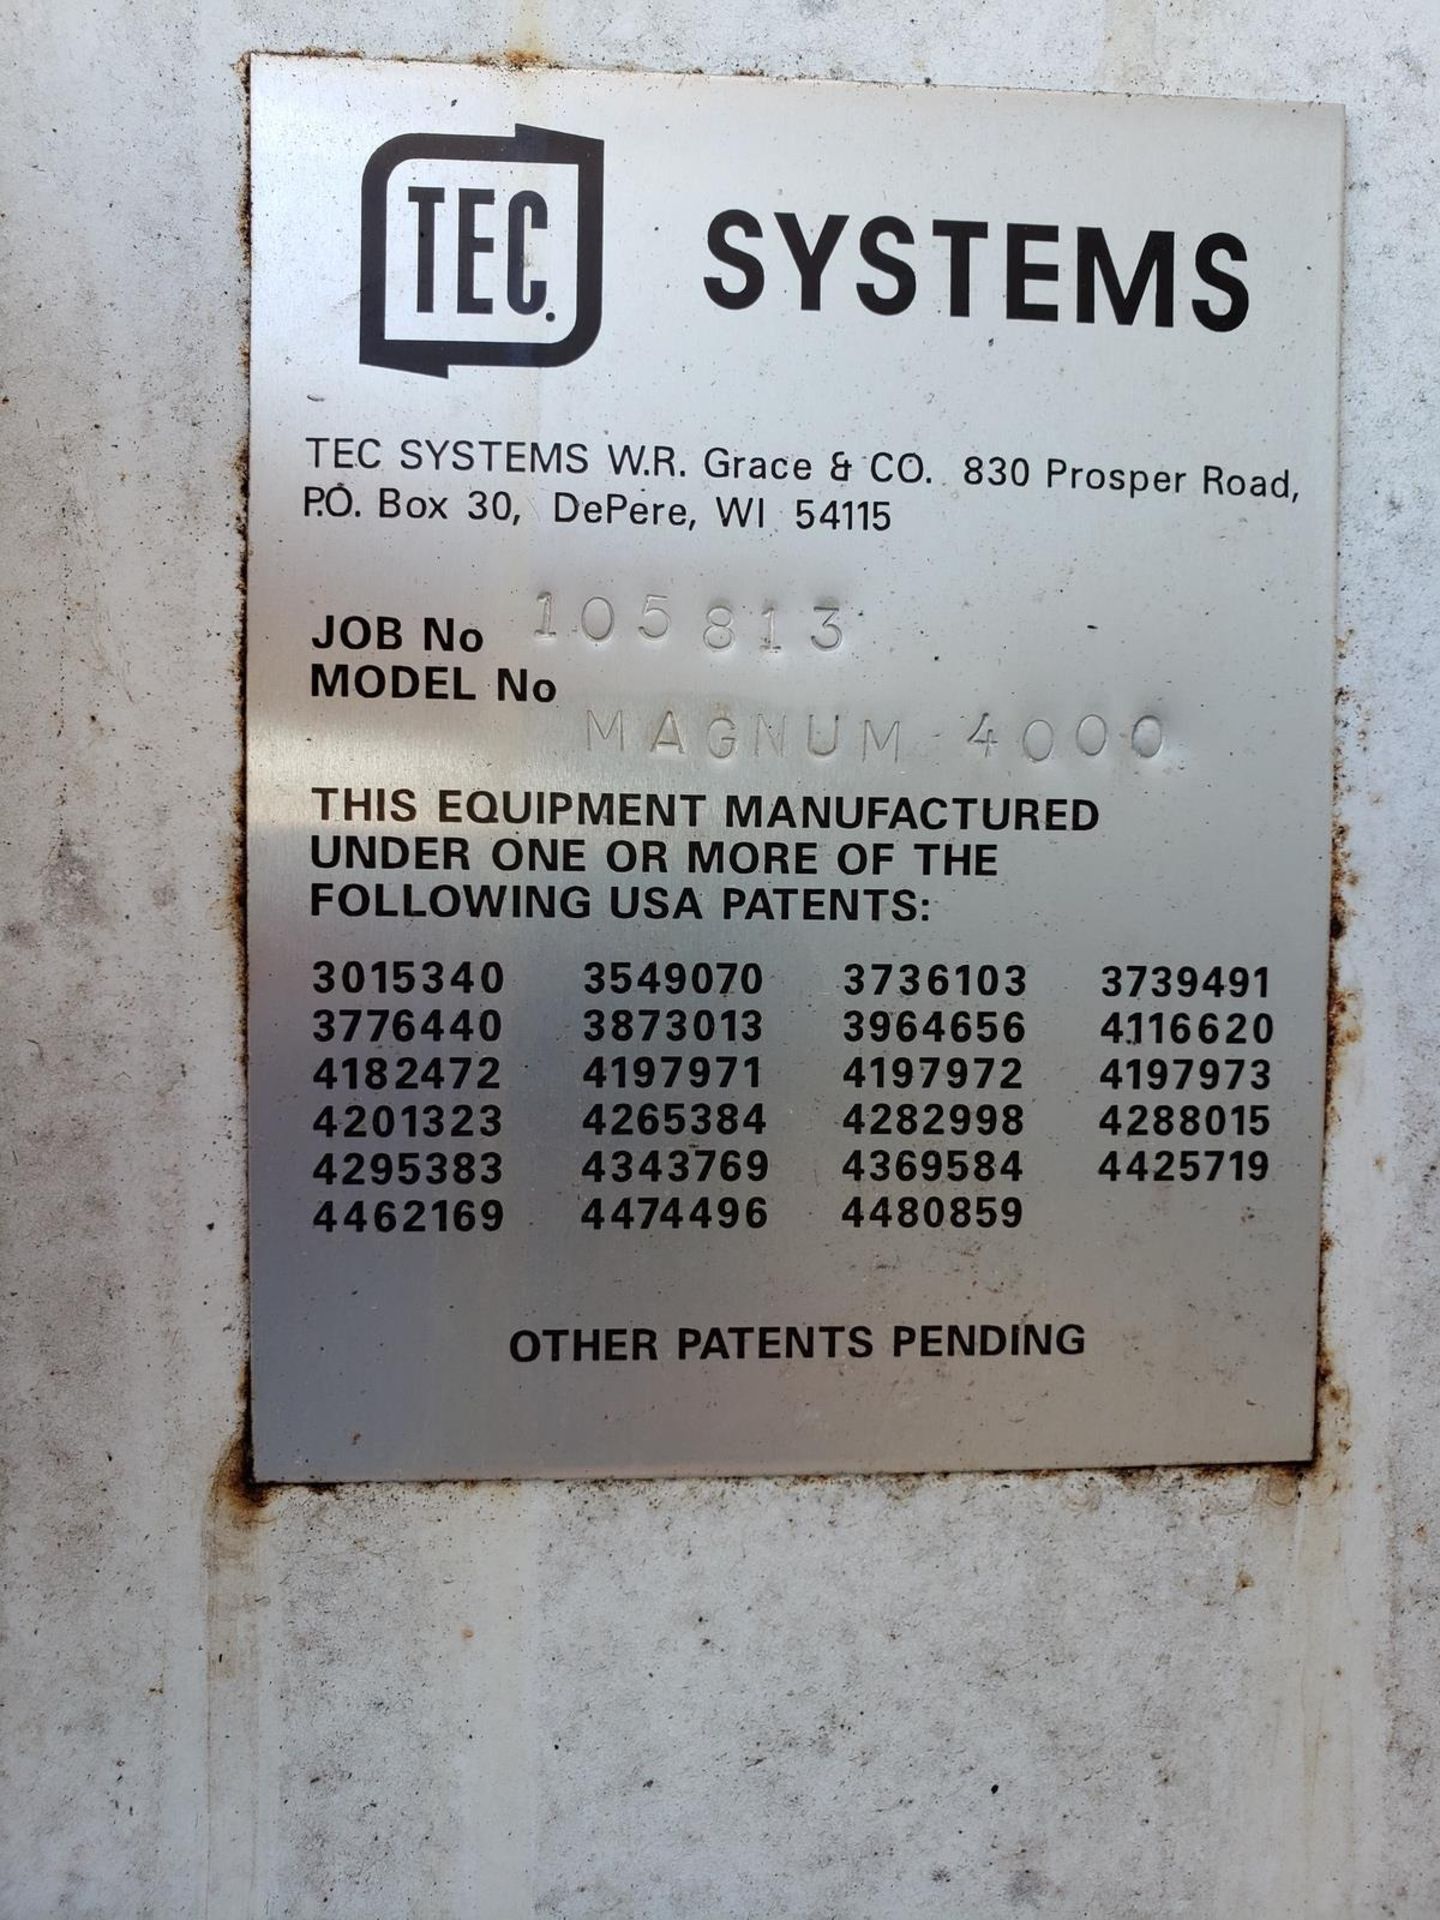 TEC Systems Thermal Oxidizer, M# Magnum 4000, S/N 105813 - Image 2 of 3